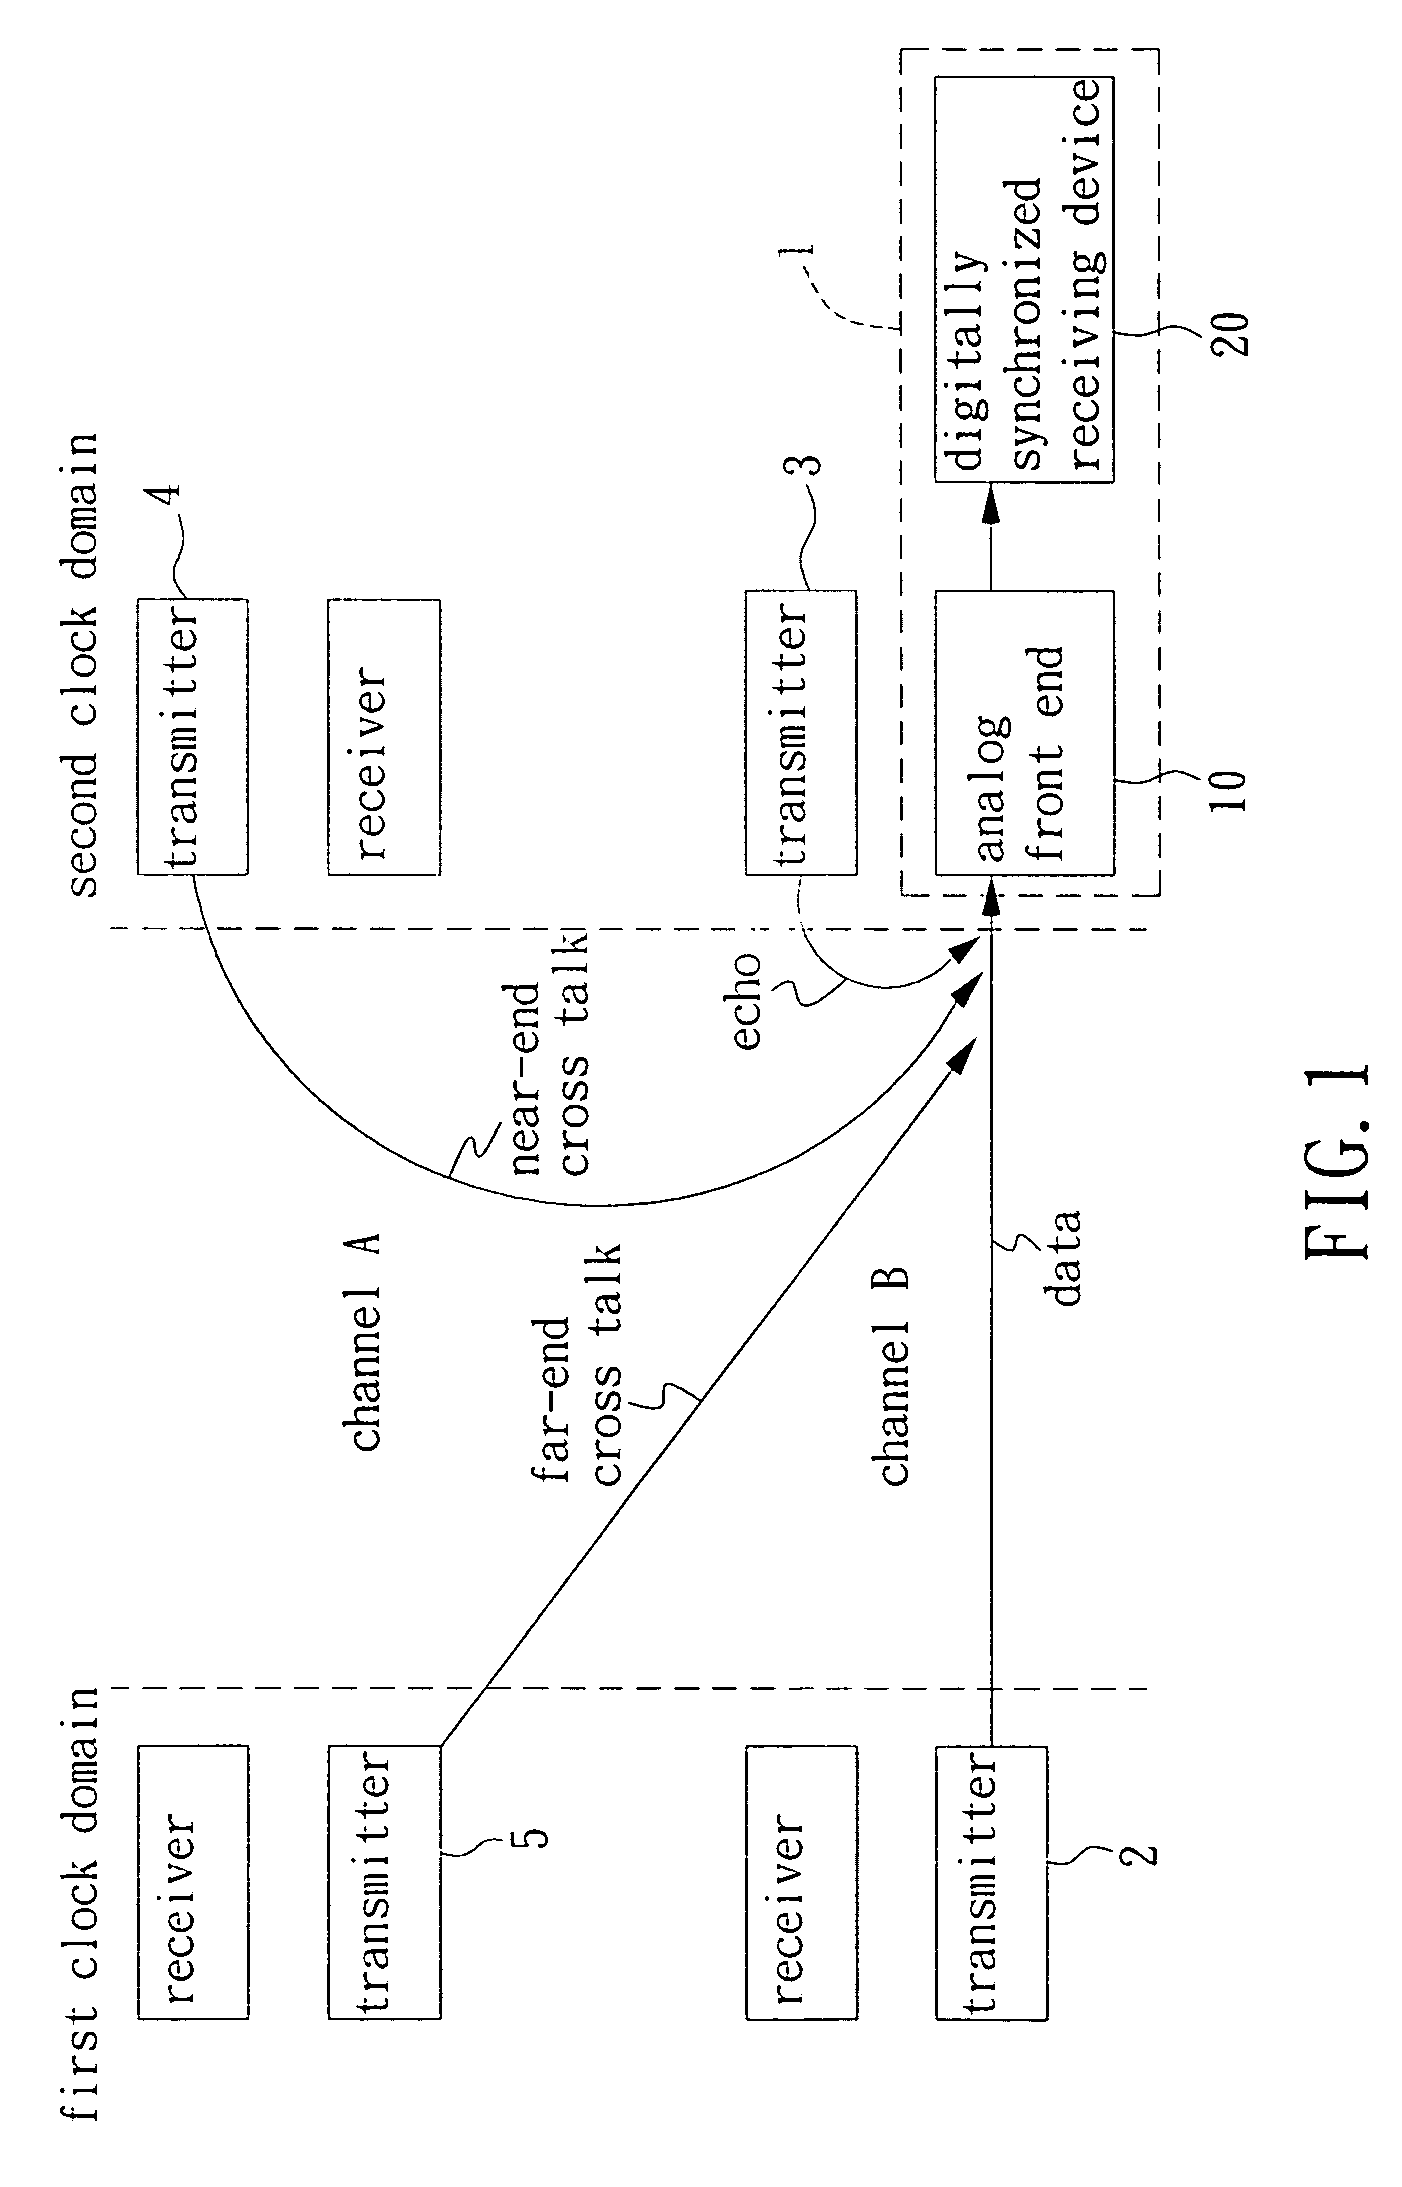 Digitally synchronized receiving device and associated signal processing method